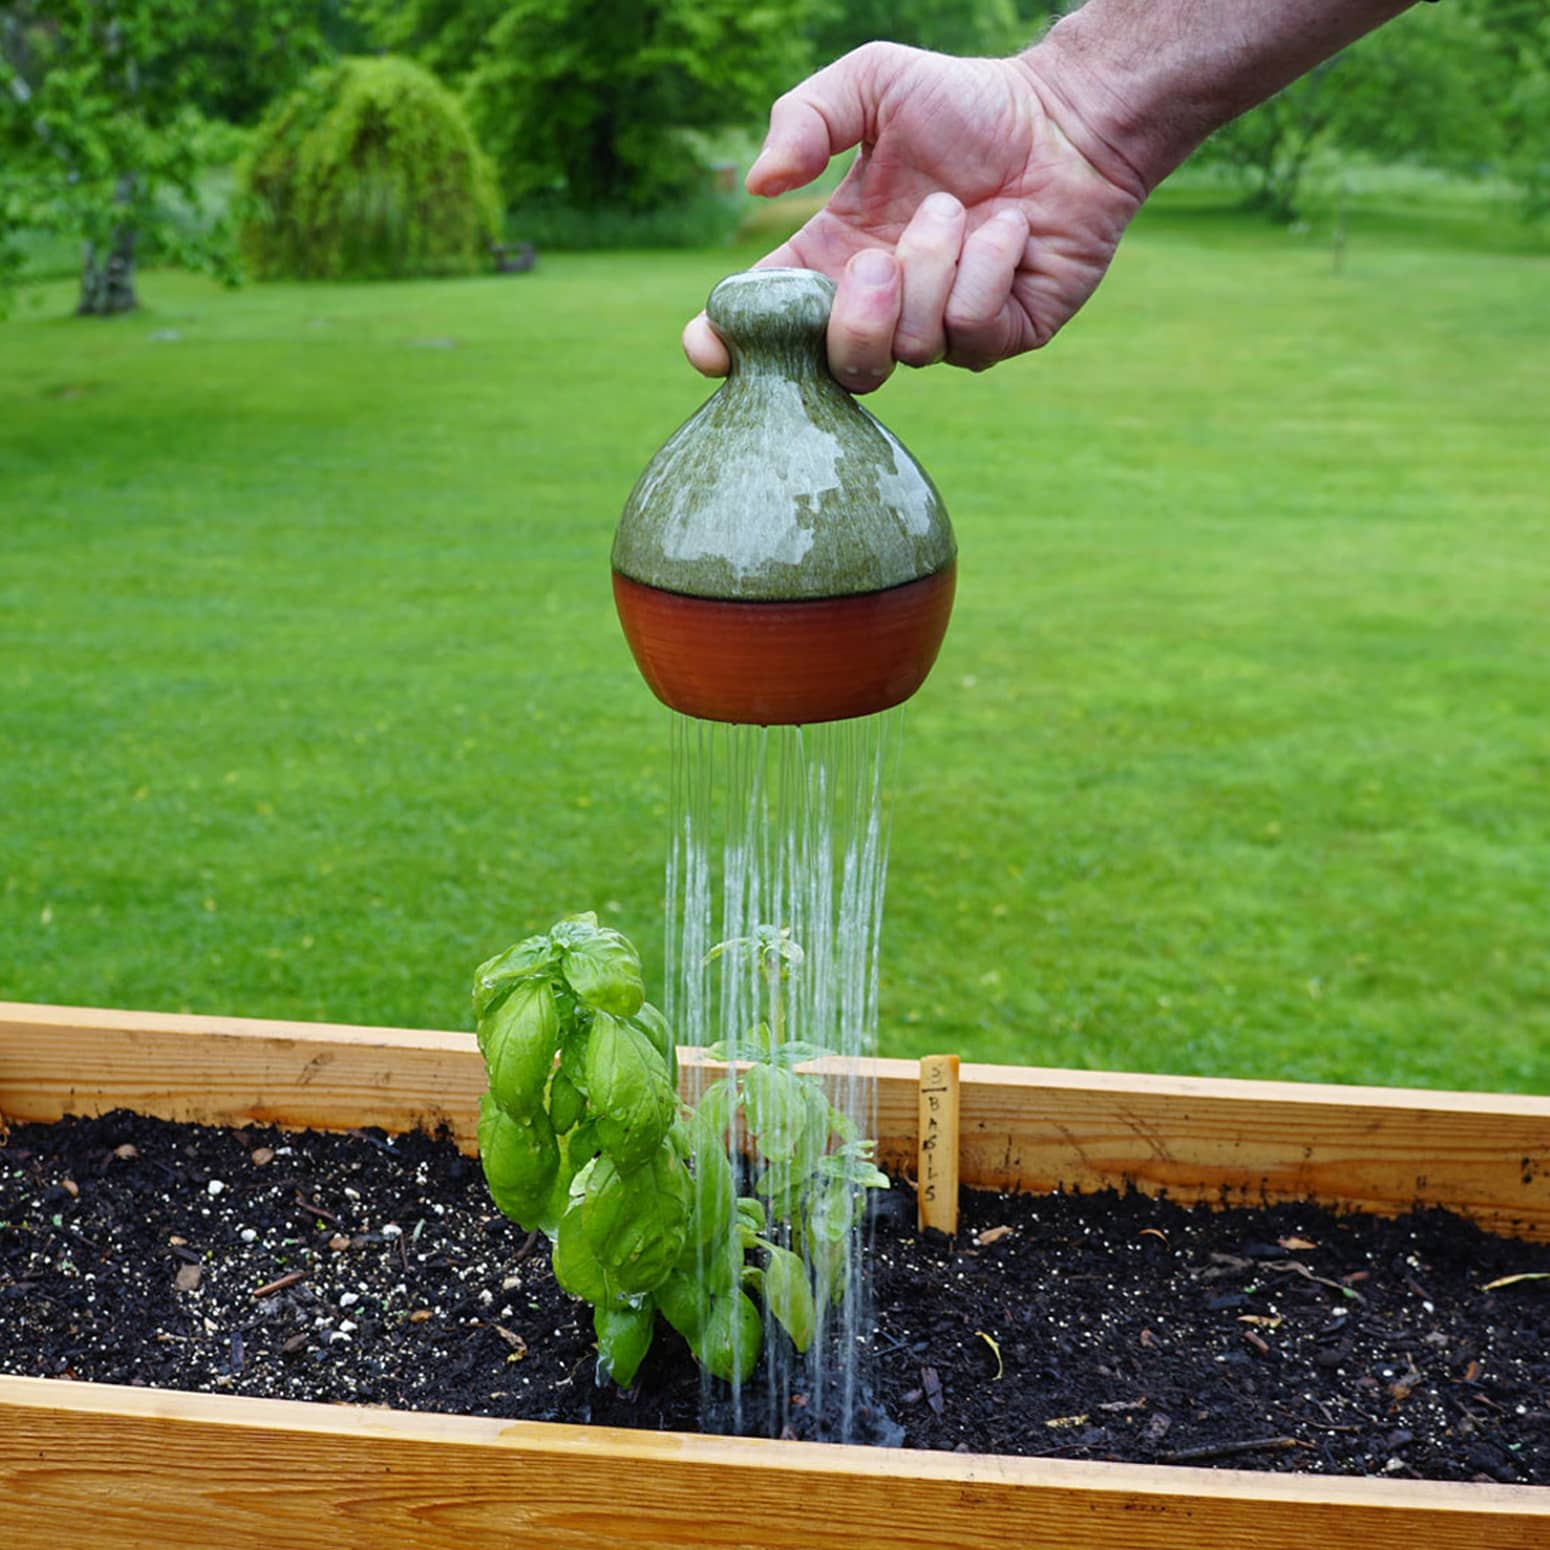 Thumb-Controlled Watering Can